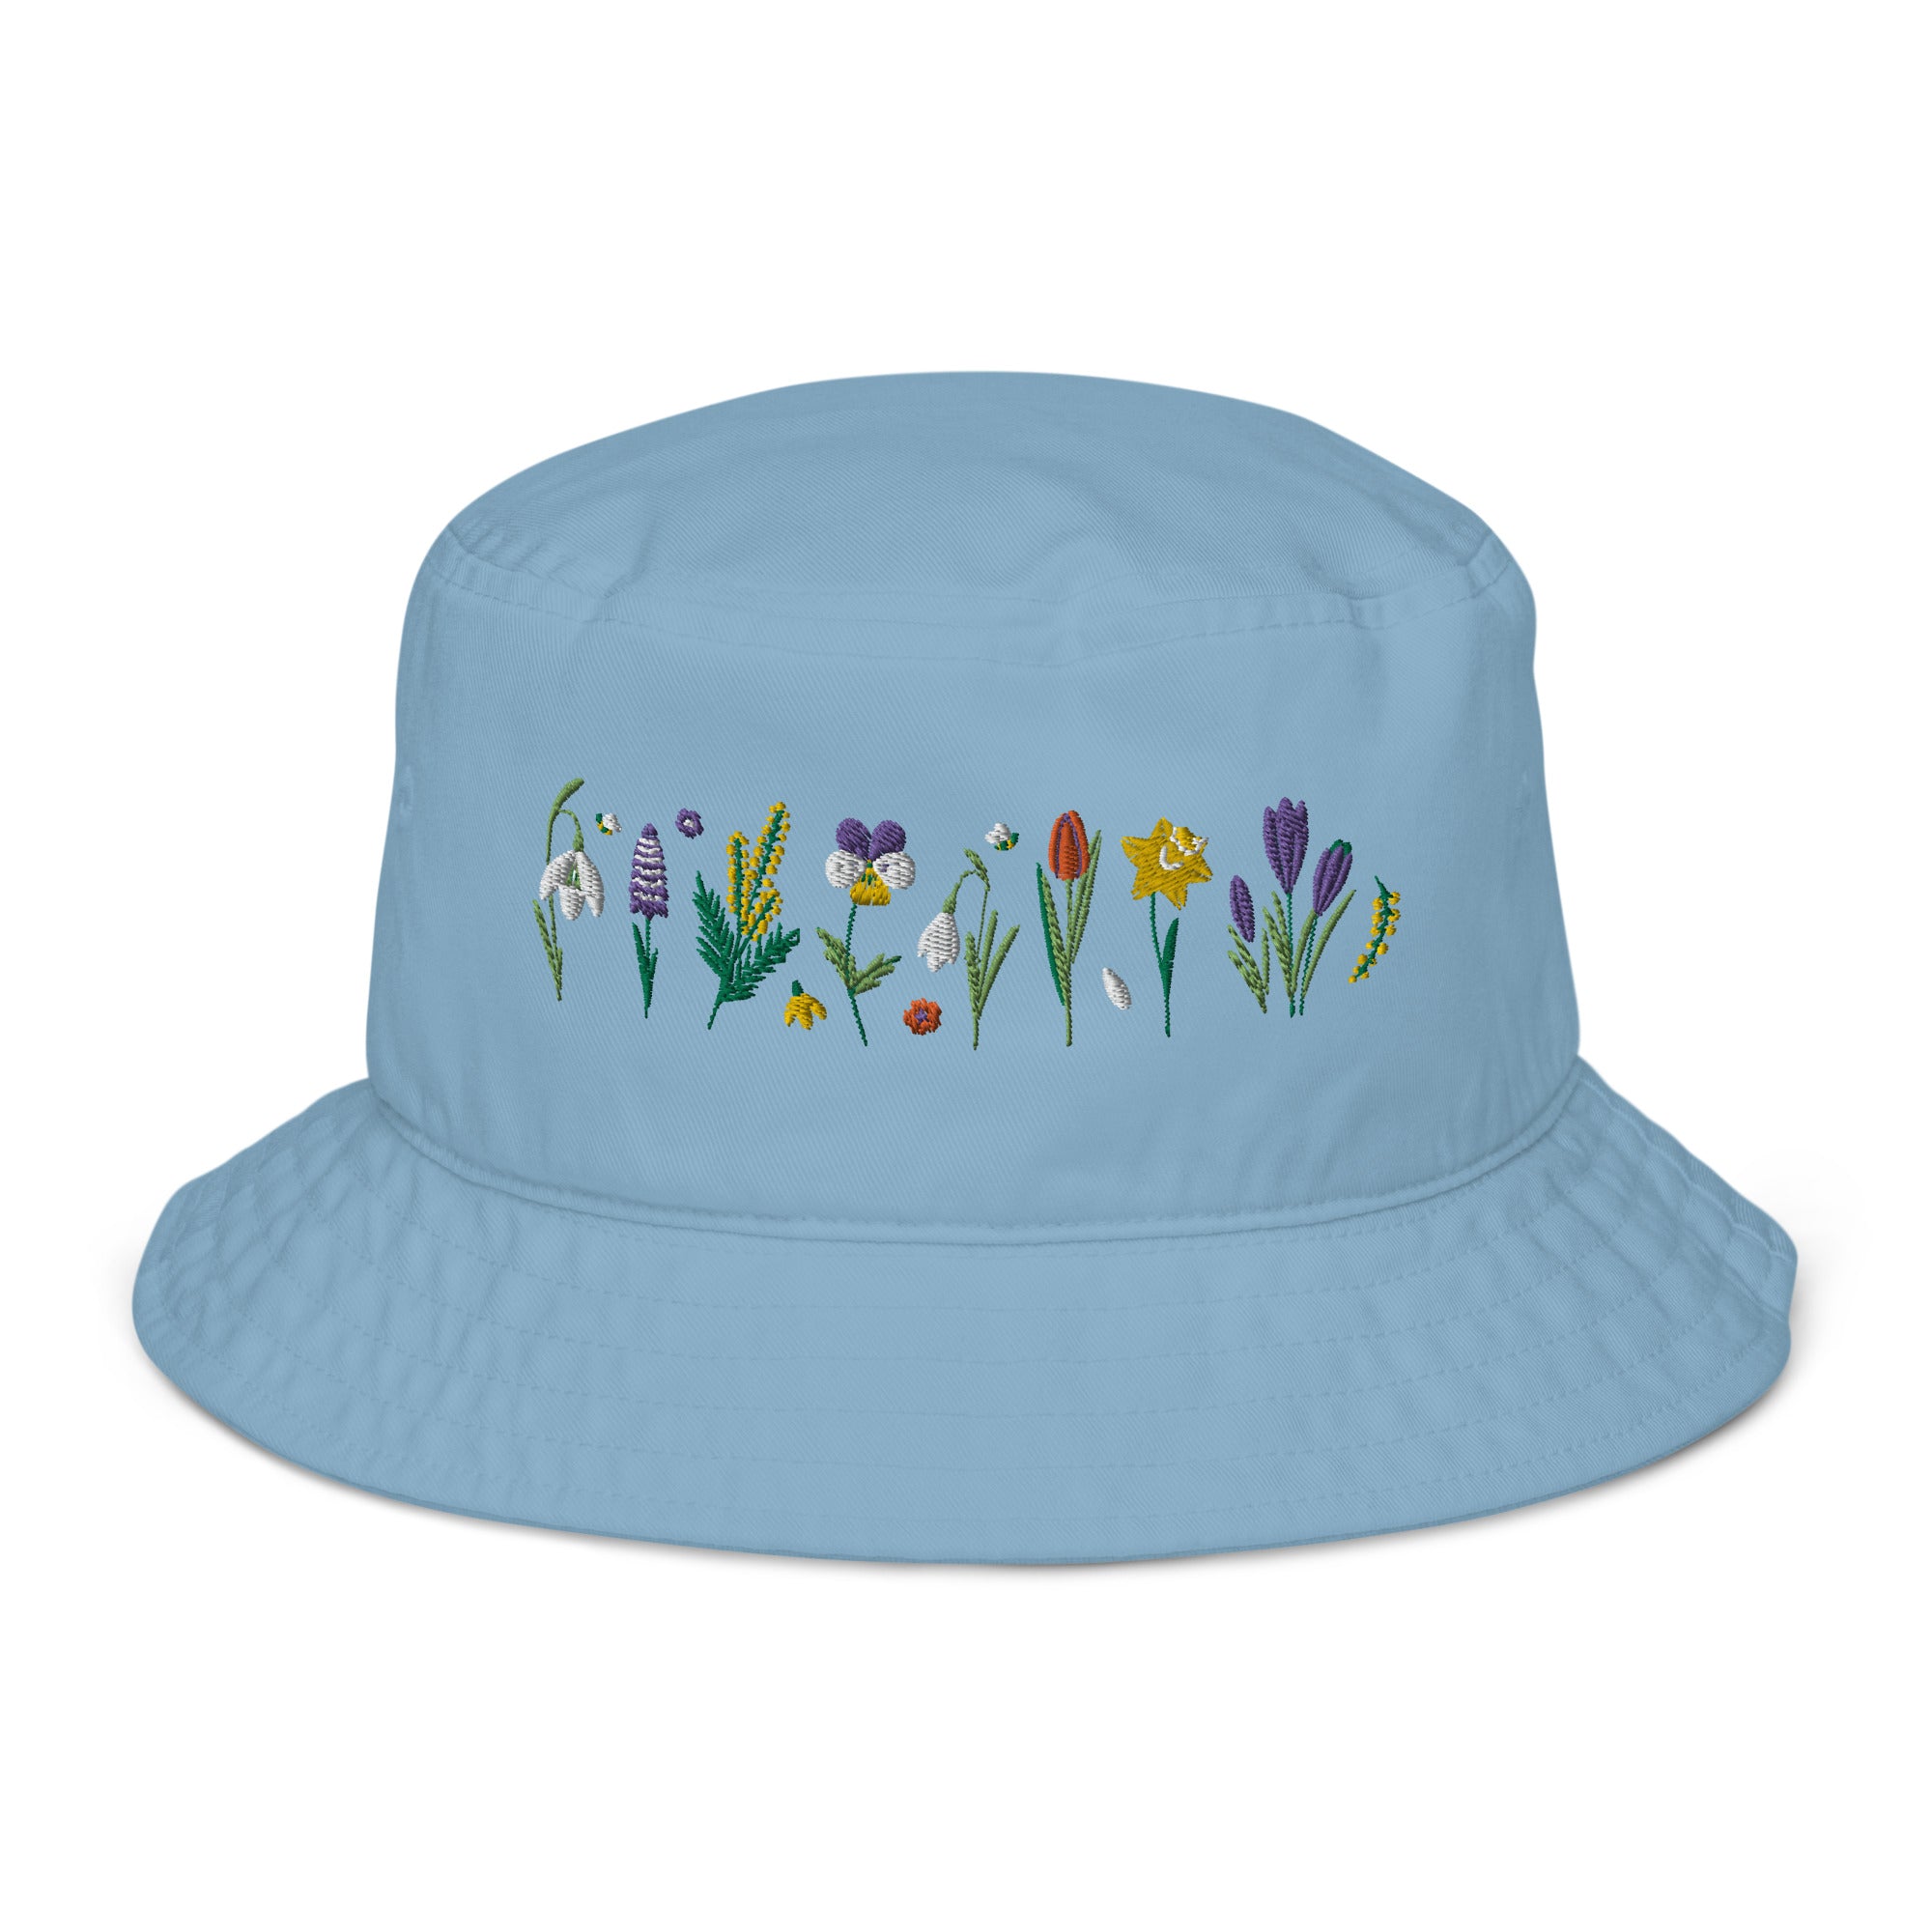 Spring Flowers - Organic Cotton bucket hat with embroidery detail